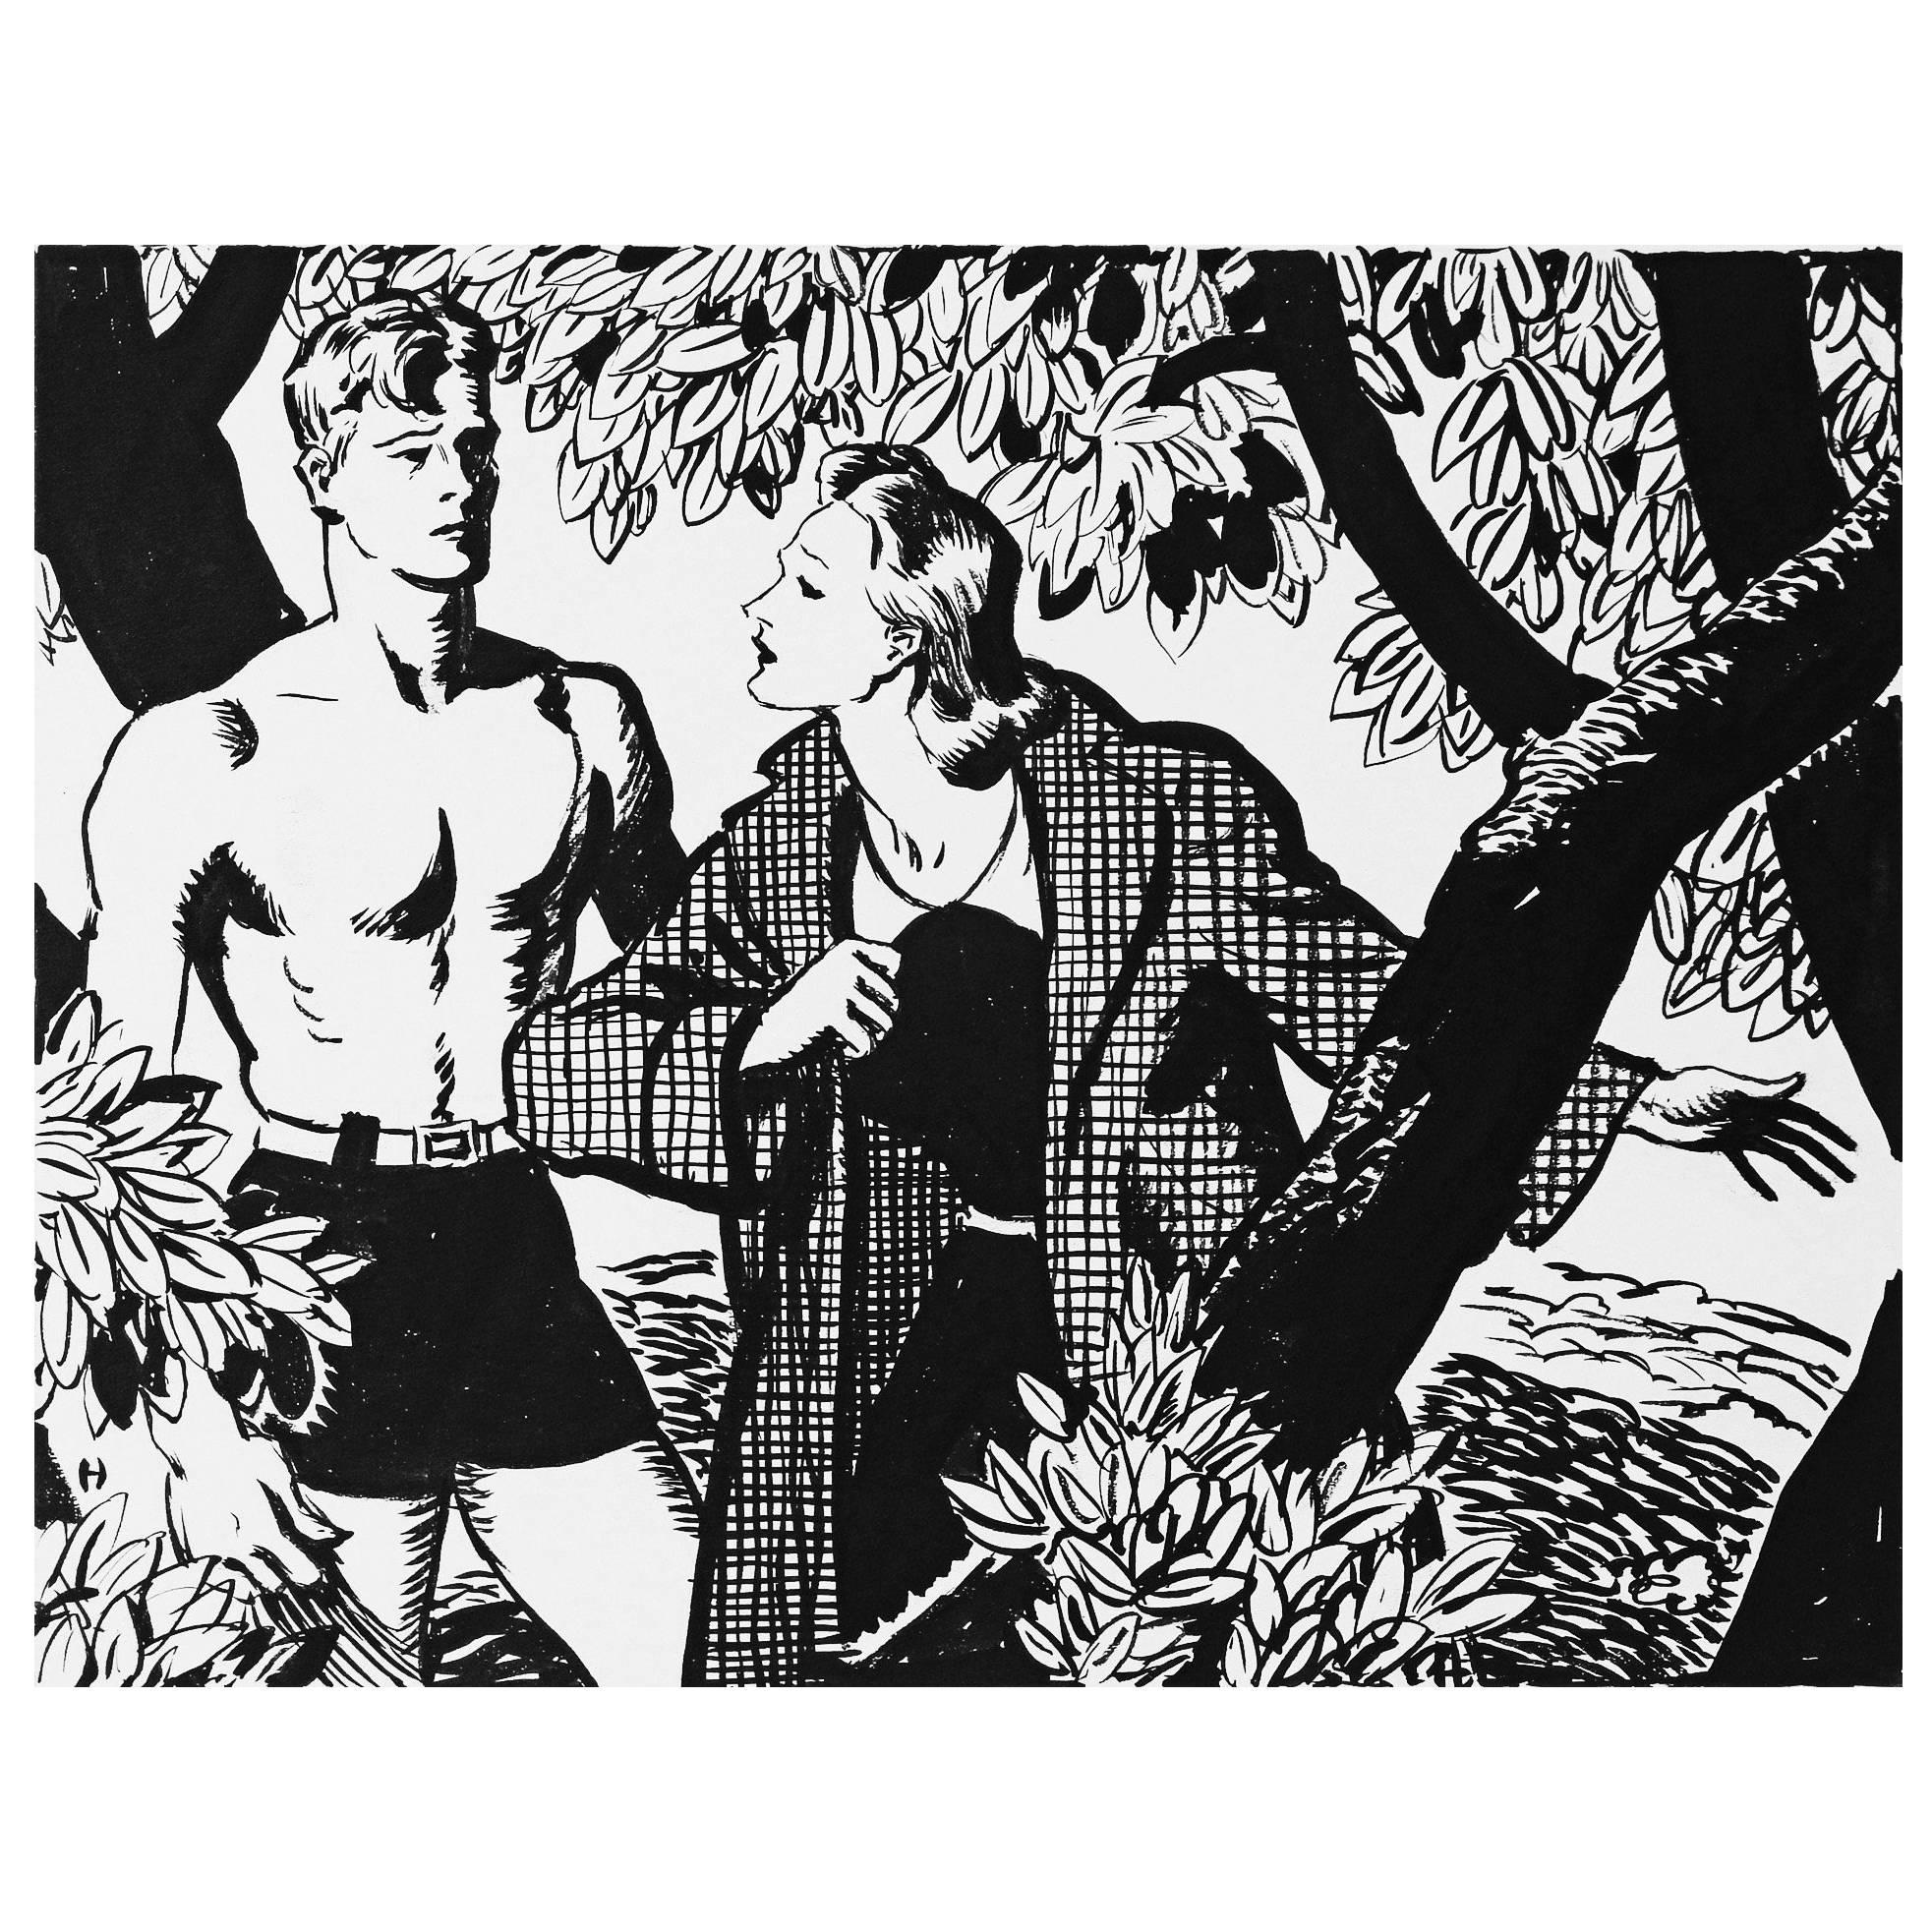 "Under the Tree, " Striking Mid-Century Scene by Heitland for Liberty Magazine